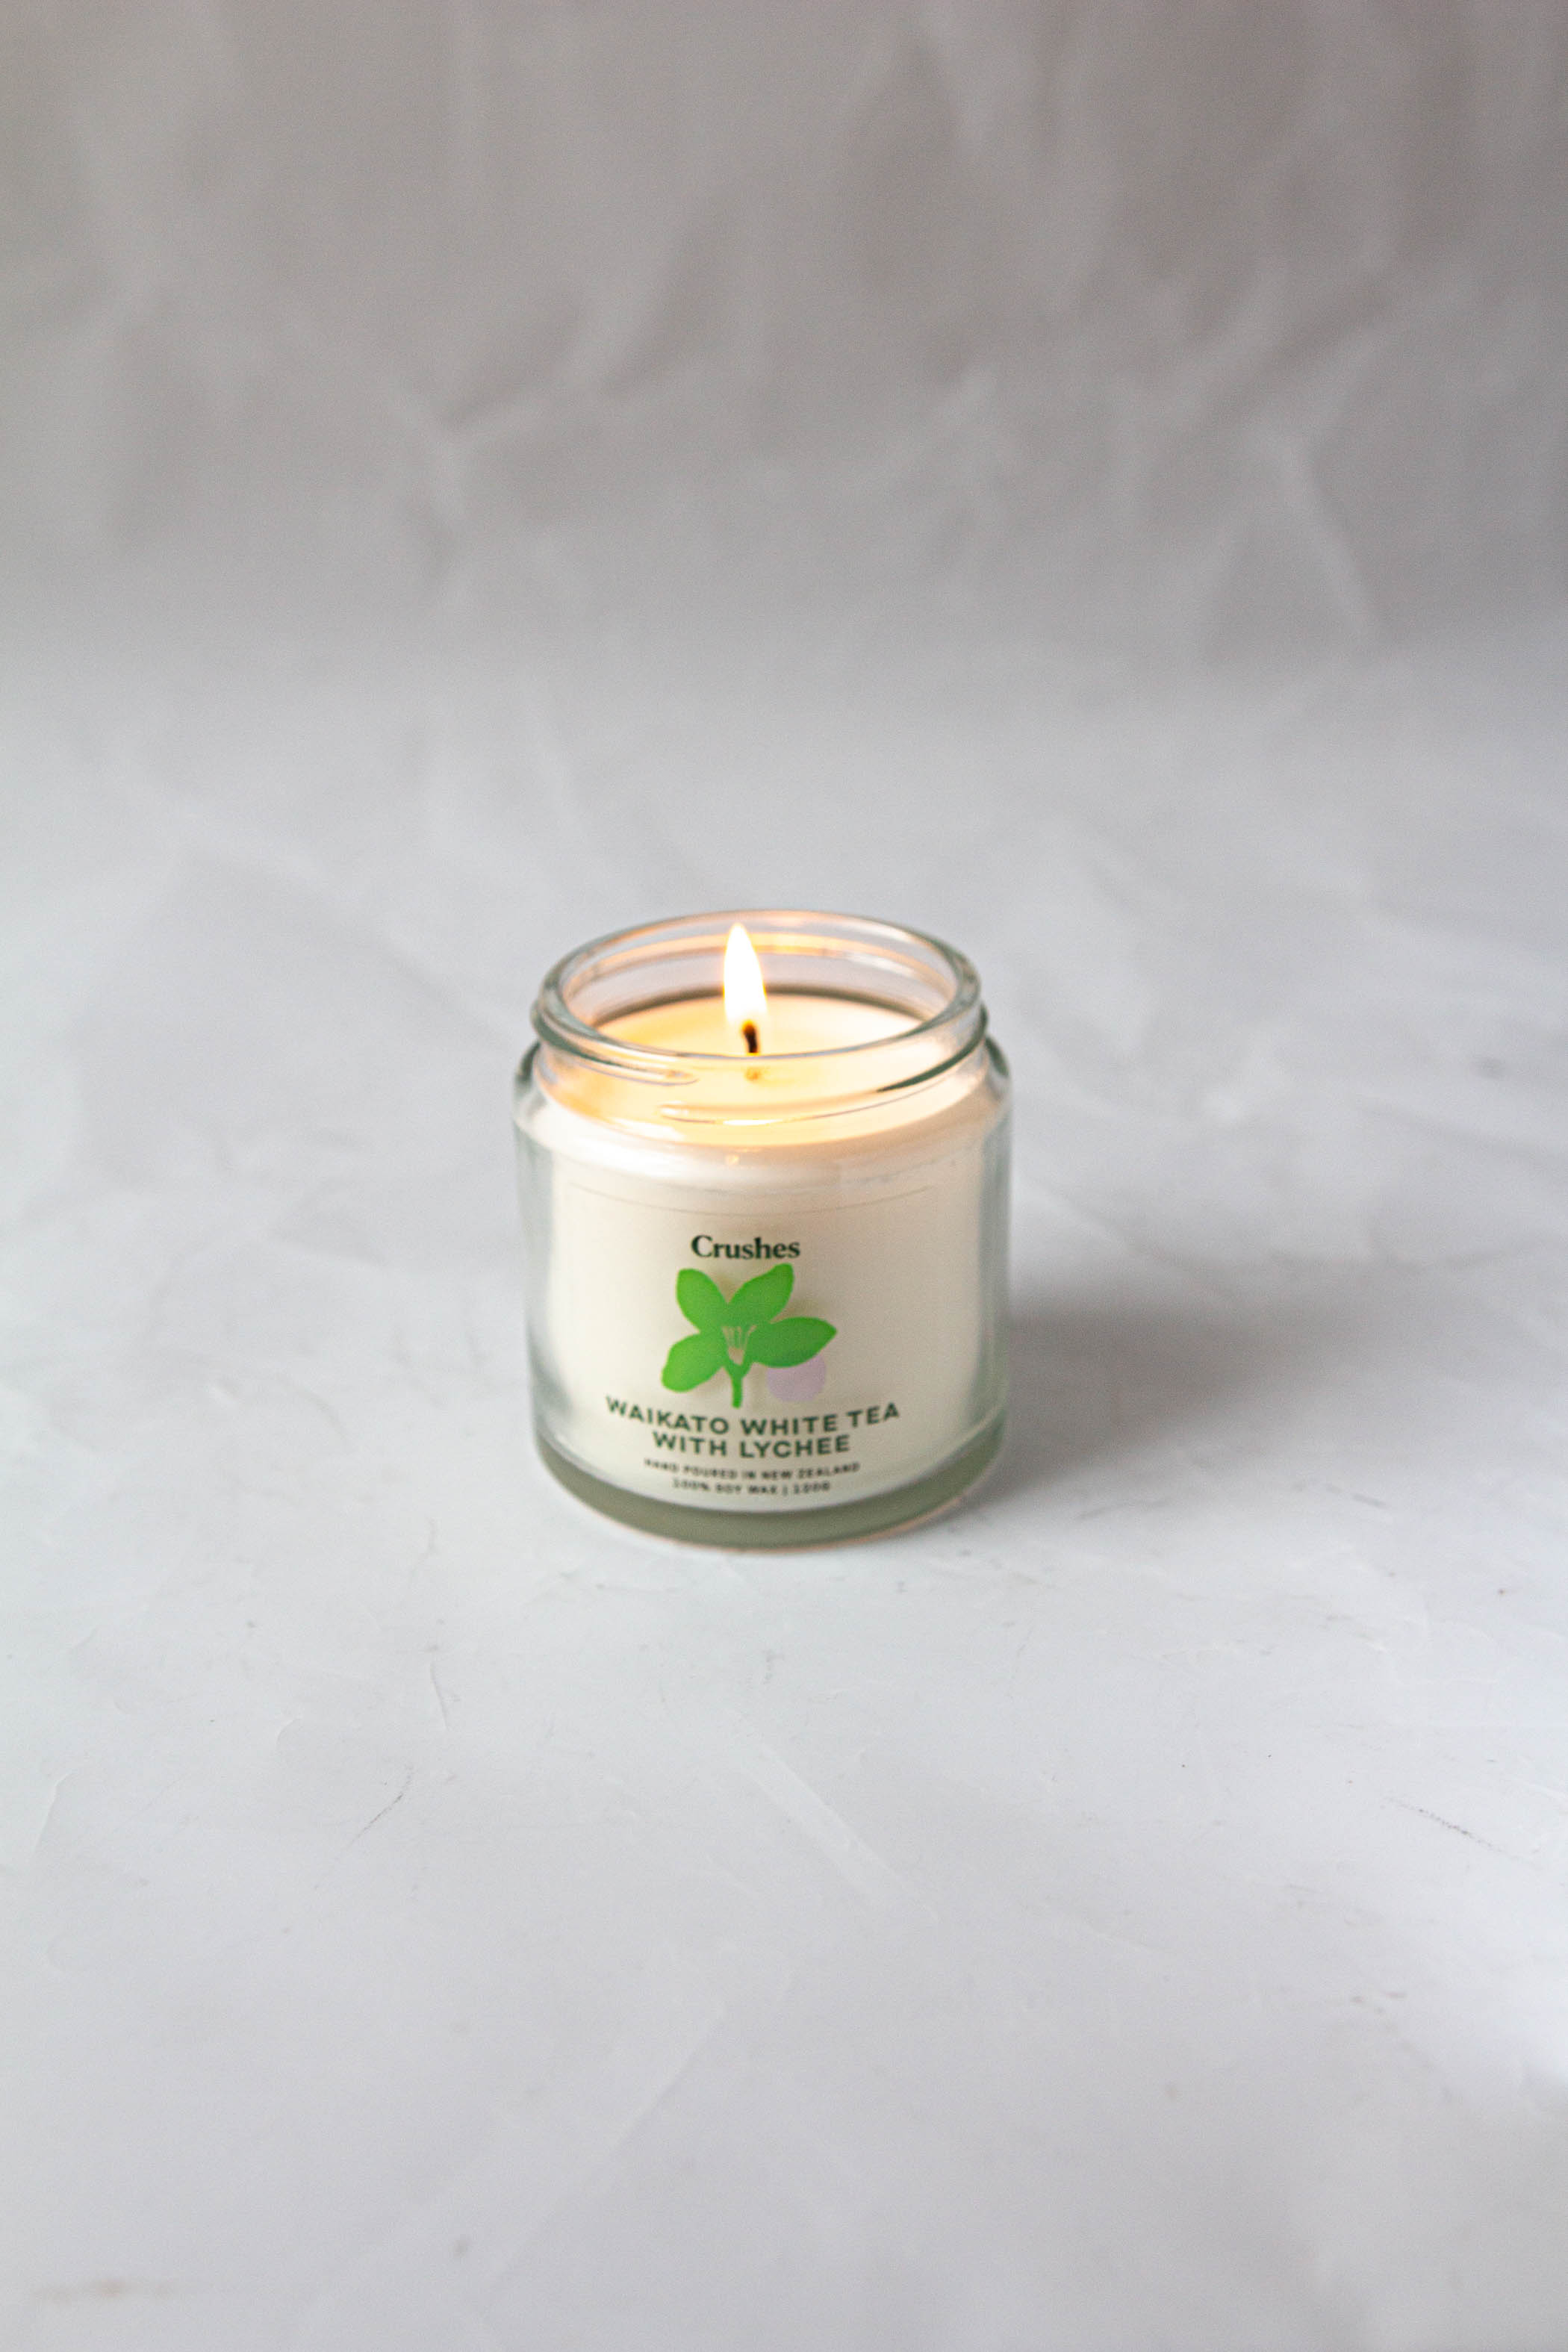 Waikato White Tea and Lychee Scented Soy Candle